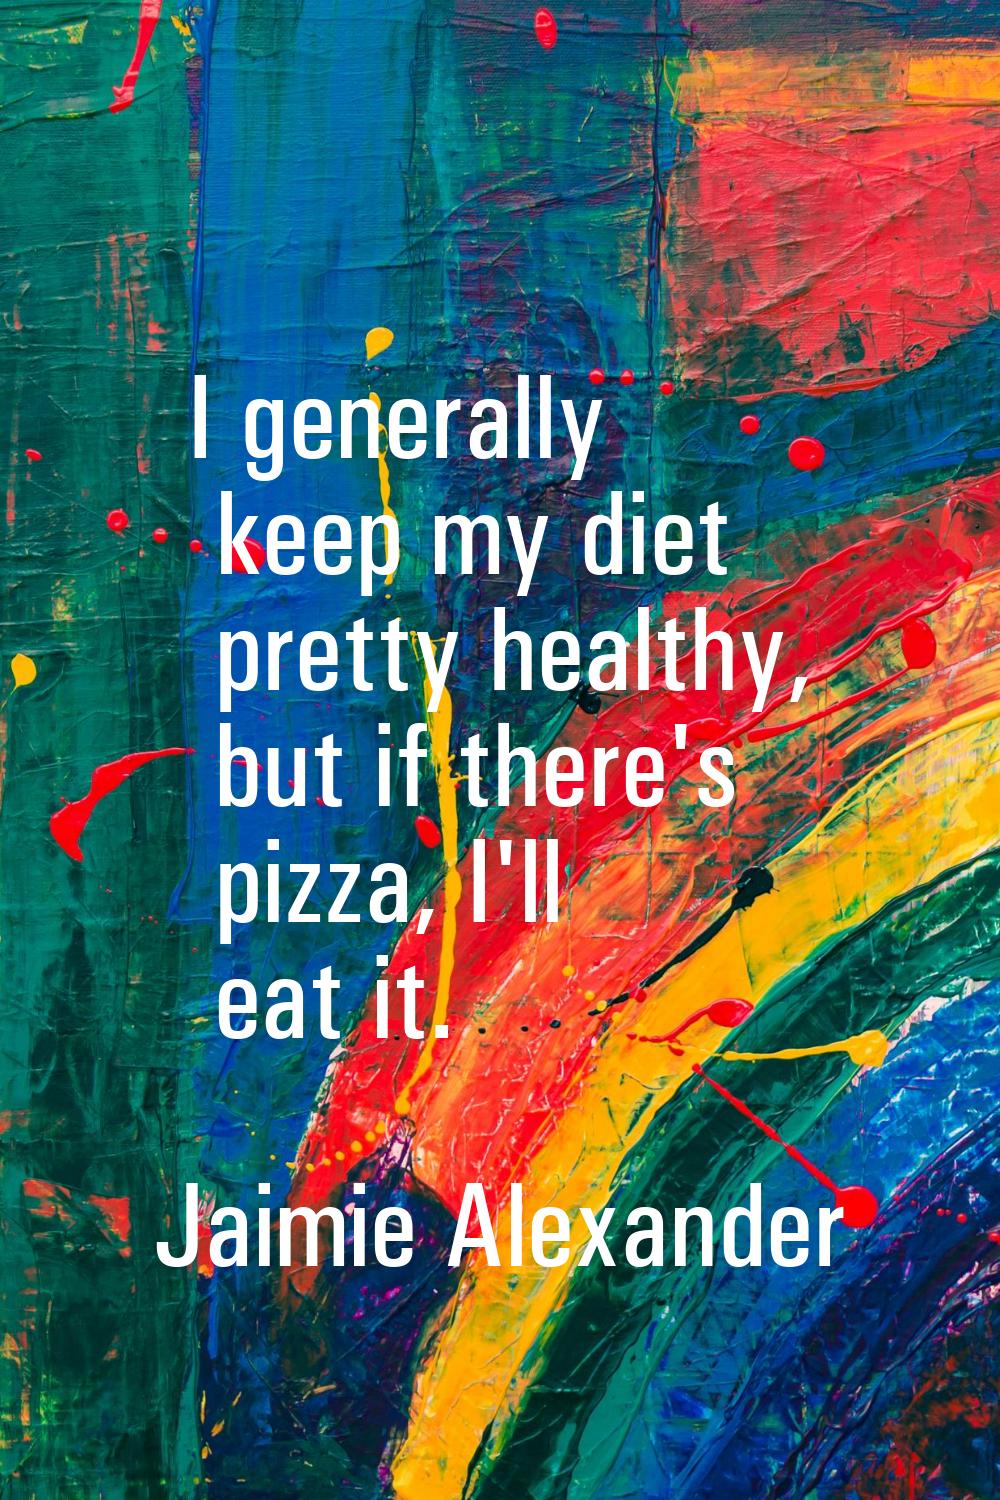 I generally keep my diet pretty healthy, but if there's pizza, I'll eat it.